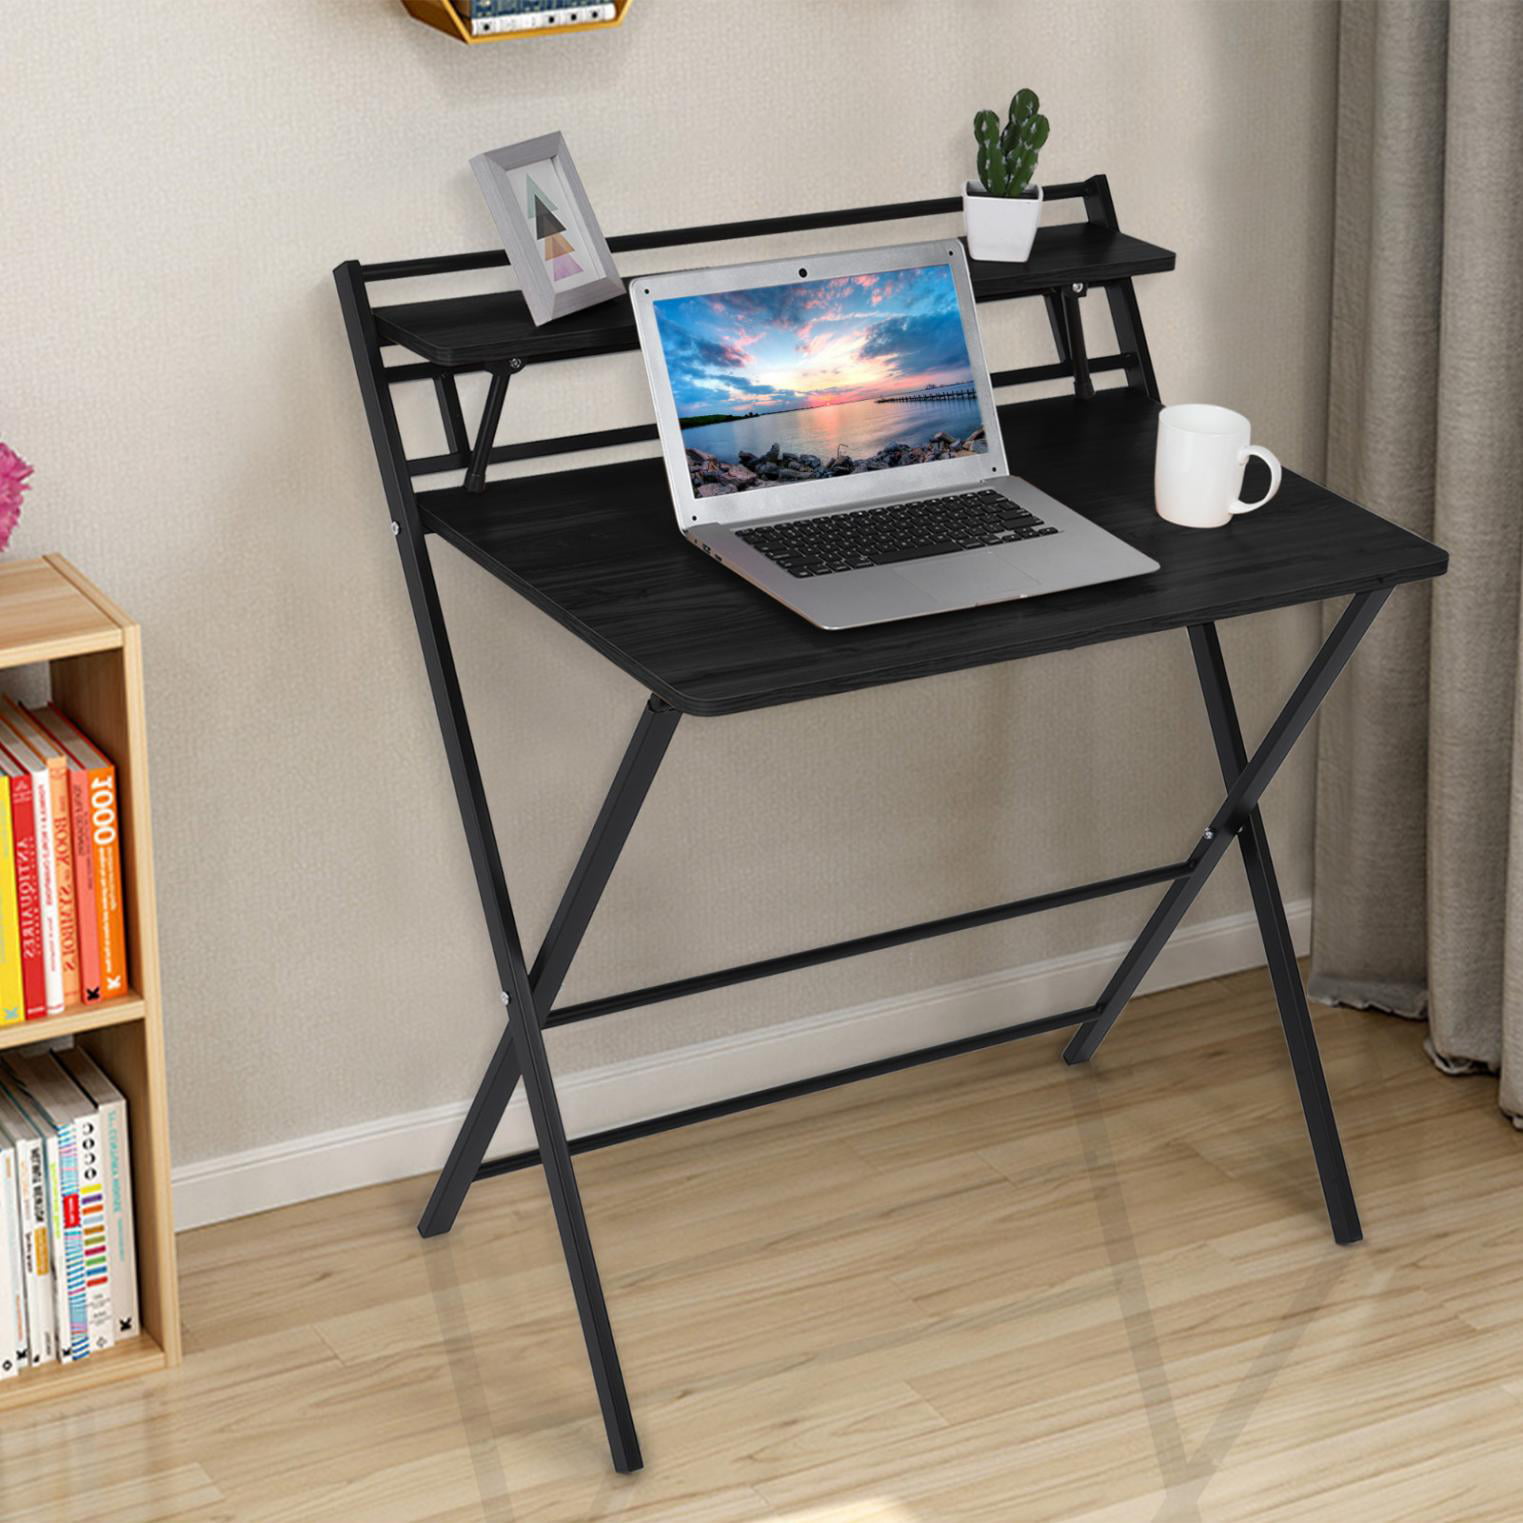 GreenForest Folding Desk No Assembly Required, 2-Tier Small 